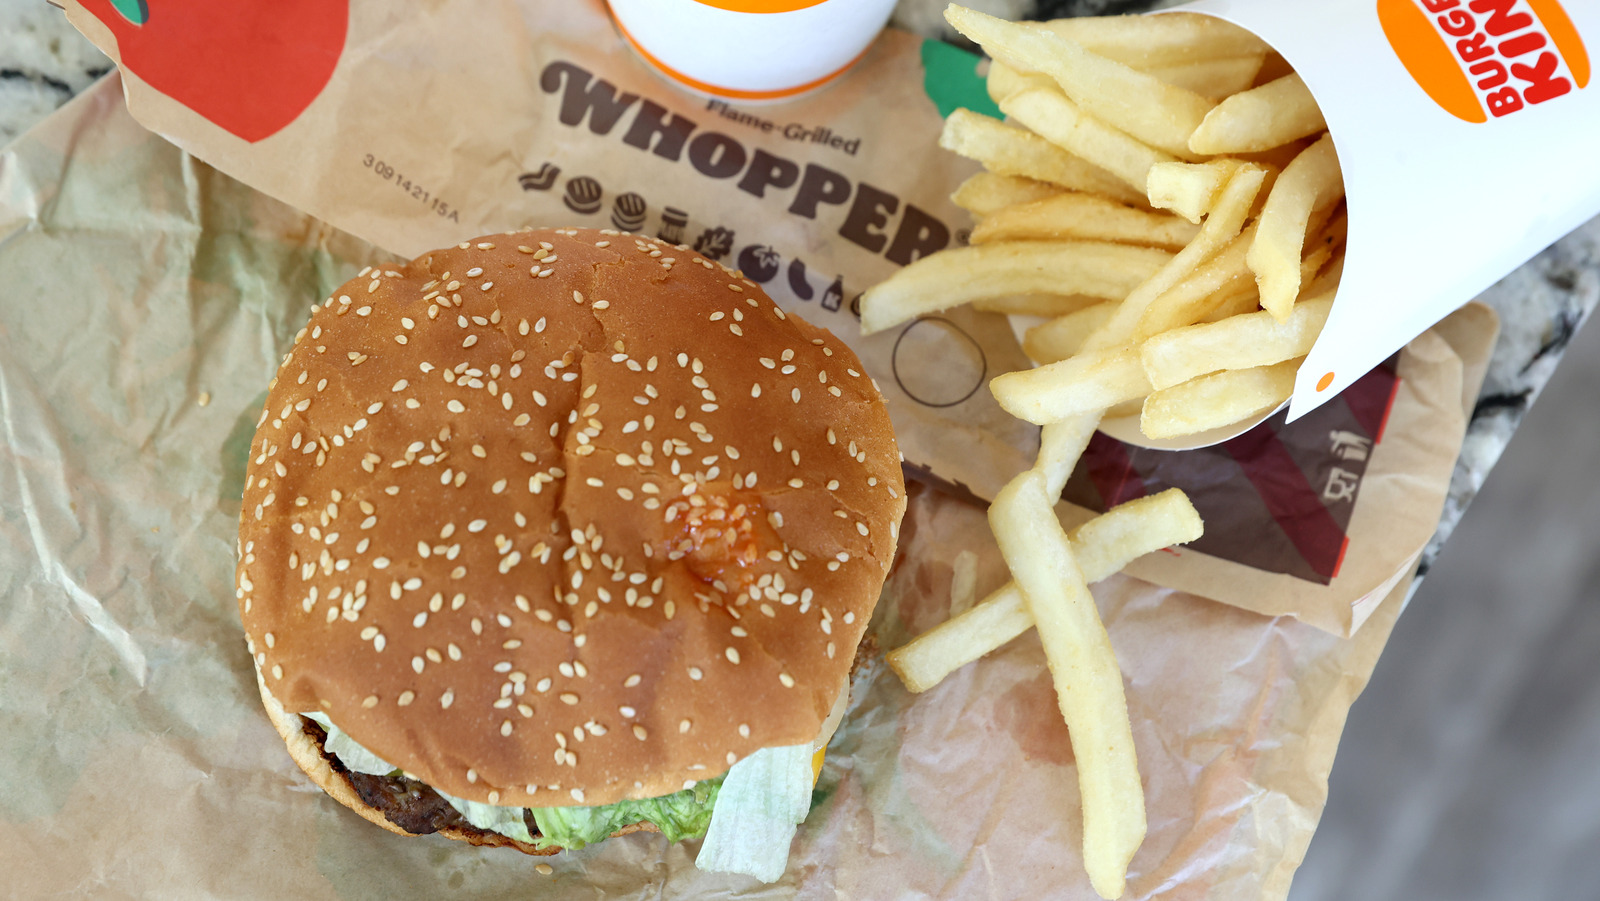 Whopper Vs. Impossible Whopper: What's The Difference?